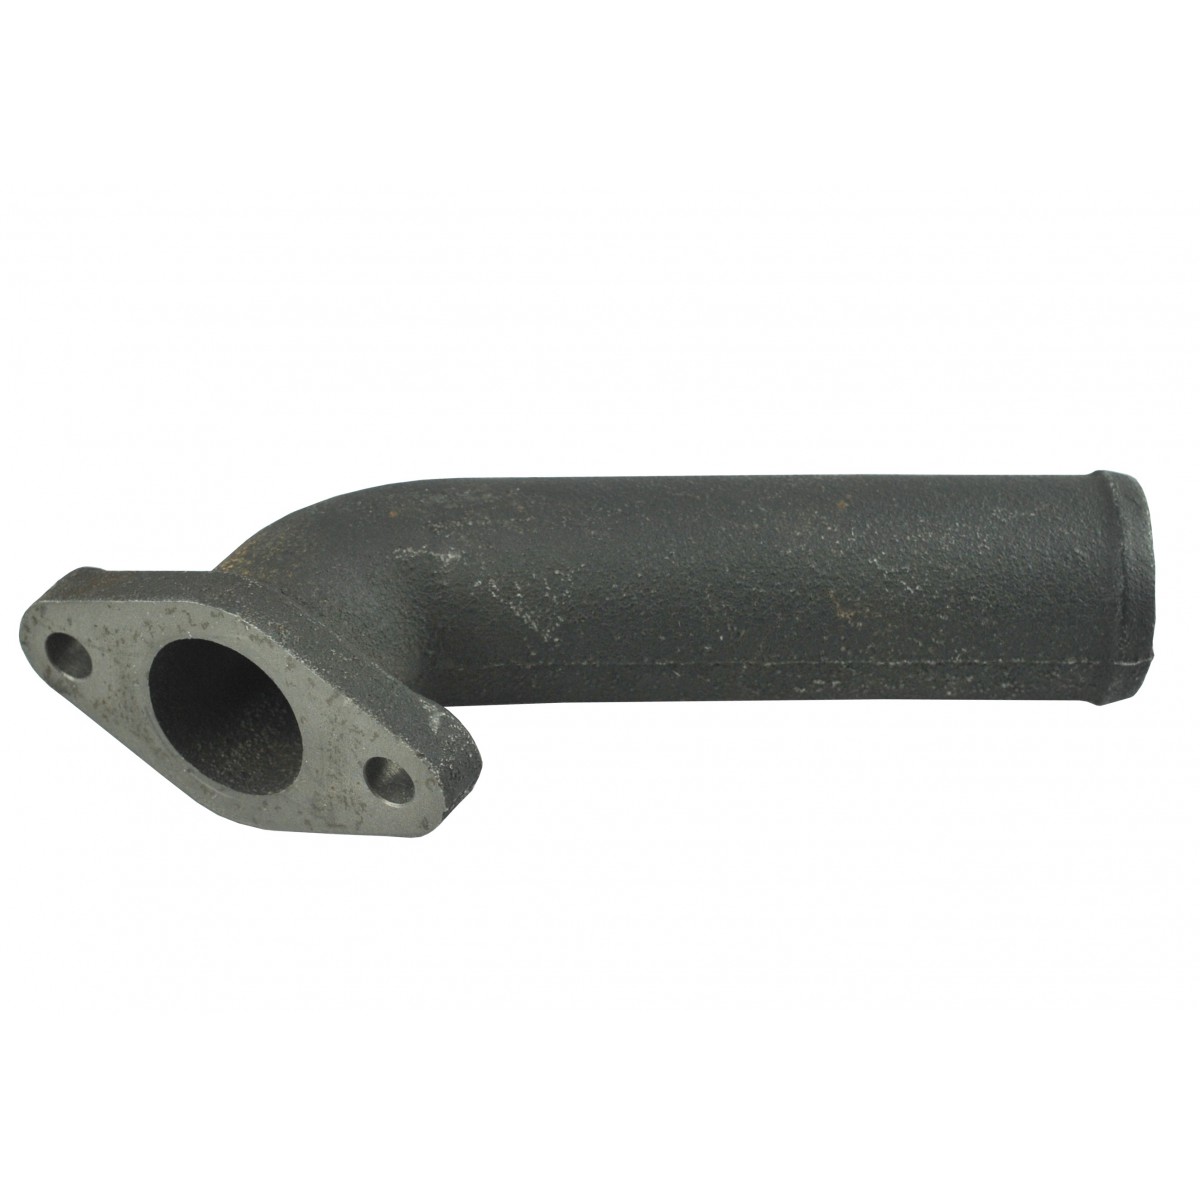 Exhaust manifold, manifold outlet, silencer mount 40 x 150 mm